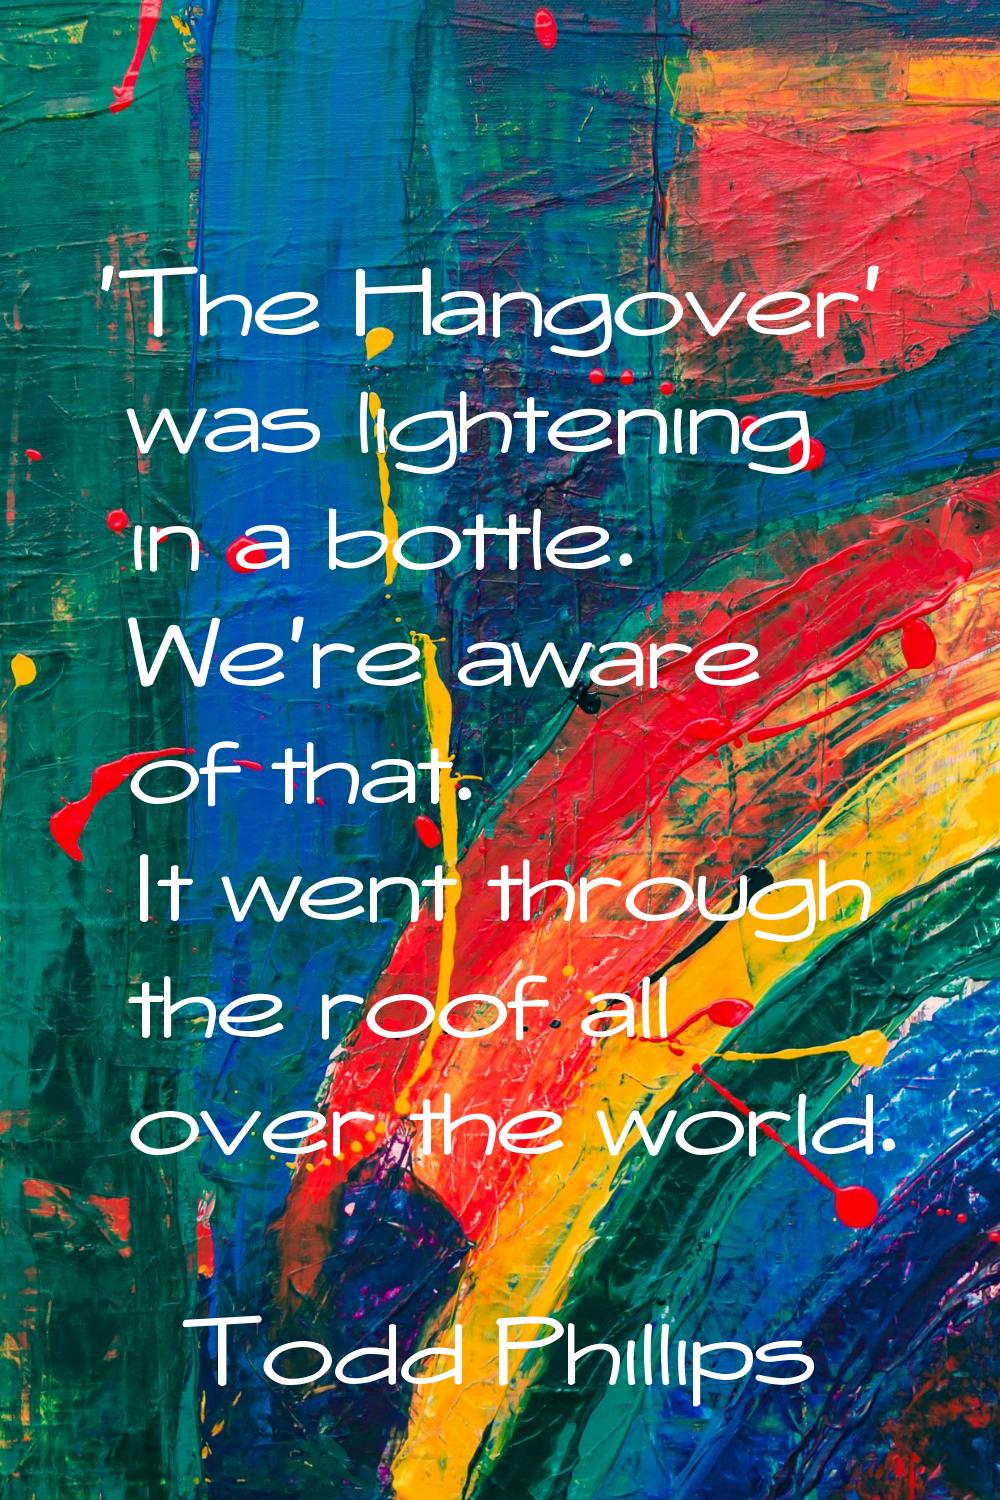 'The Hangover' was lightening in a bottle. We're aware of that. It went through the roof all over t